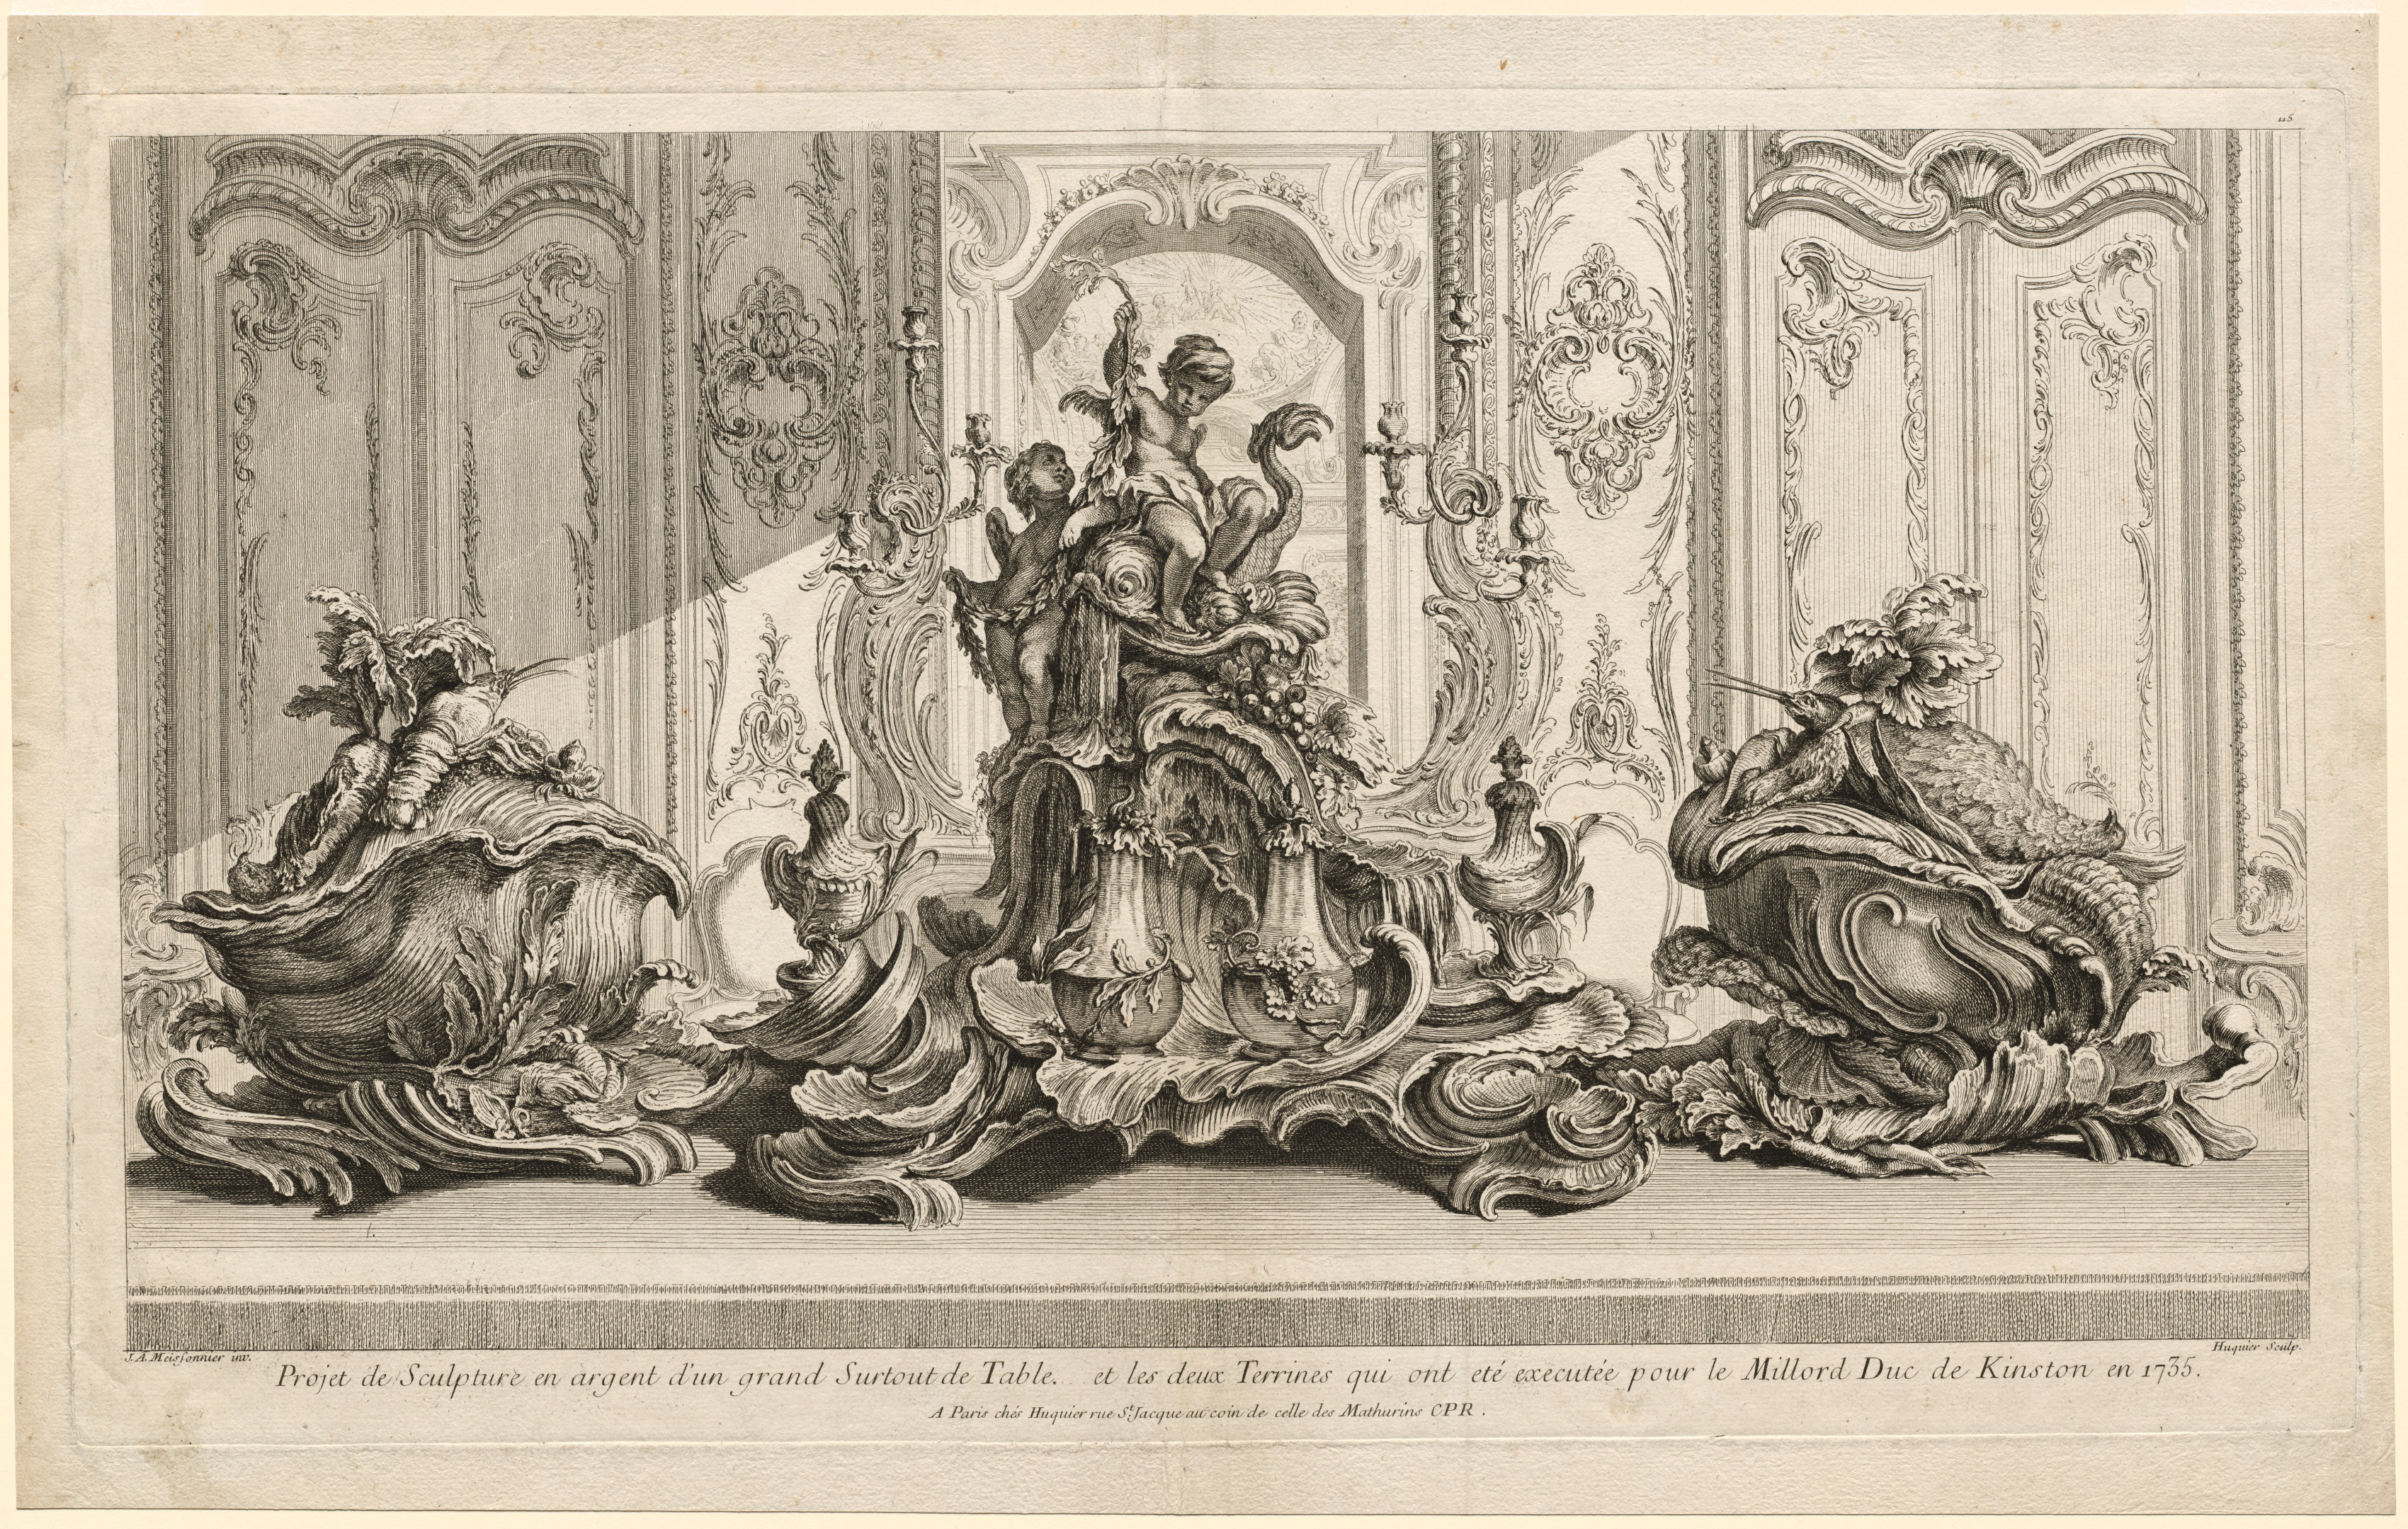 Works of Juste-Aurèle Meissonier:  Silver Sculptural Project for a Large Centerpiece and Two Tureens Which Have Been Executed for His Lordship the Duke of Kingston